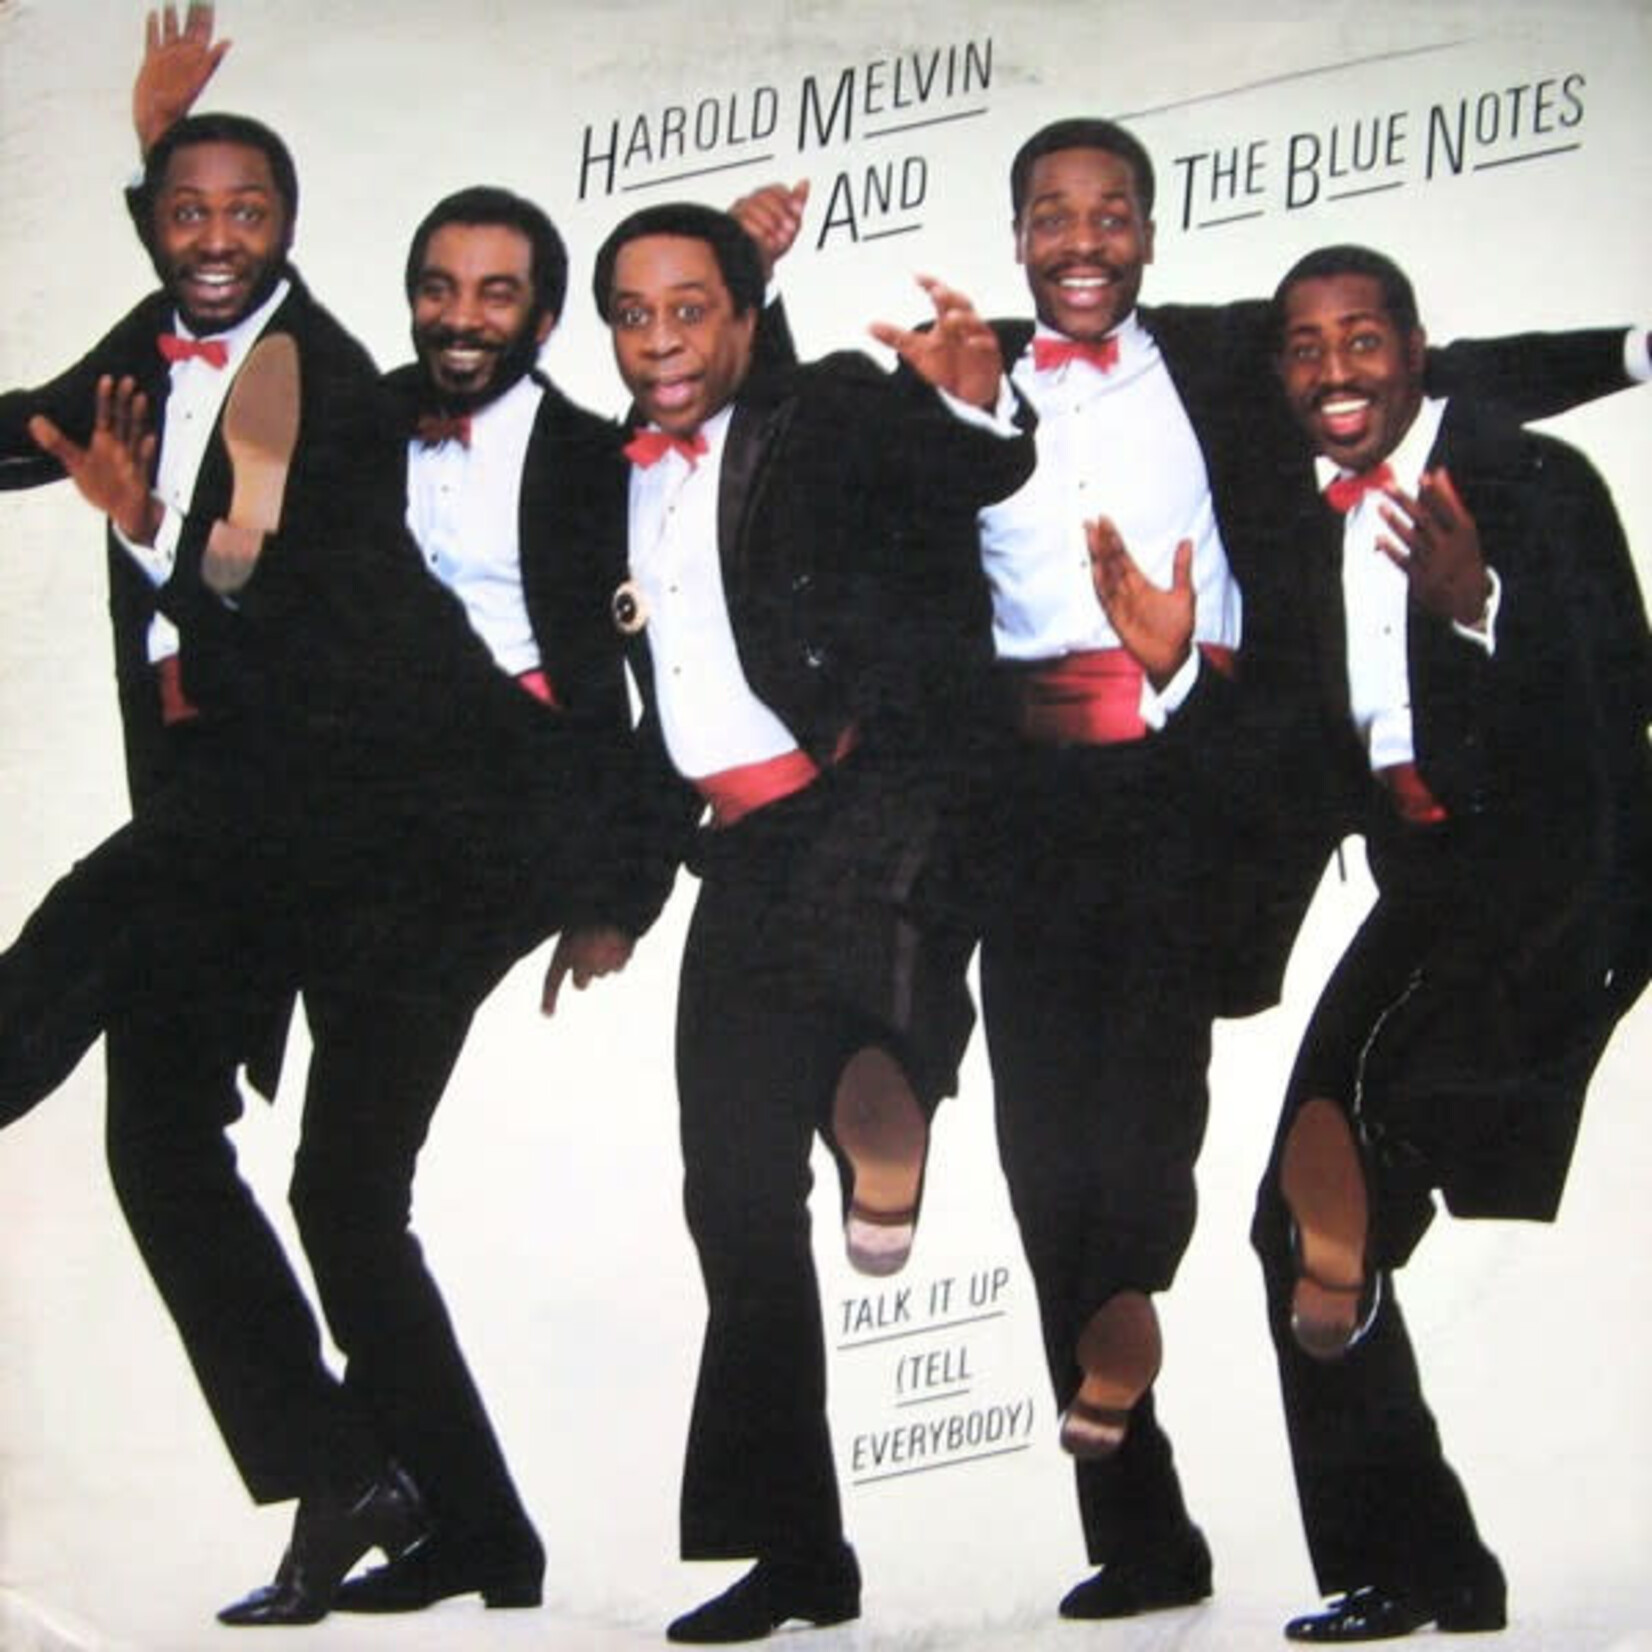 Melvin, Harold & The Blue Notes: Talk It Up (Tell Everybody) [VINTAGE]